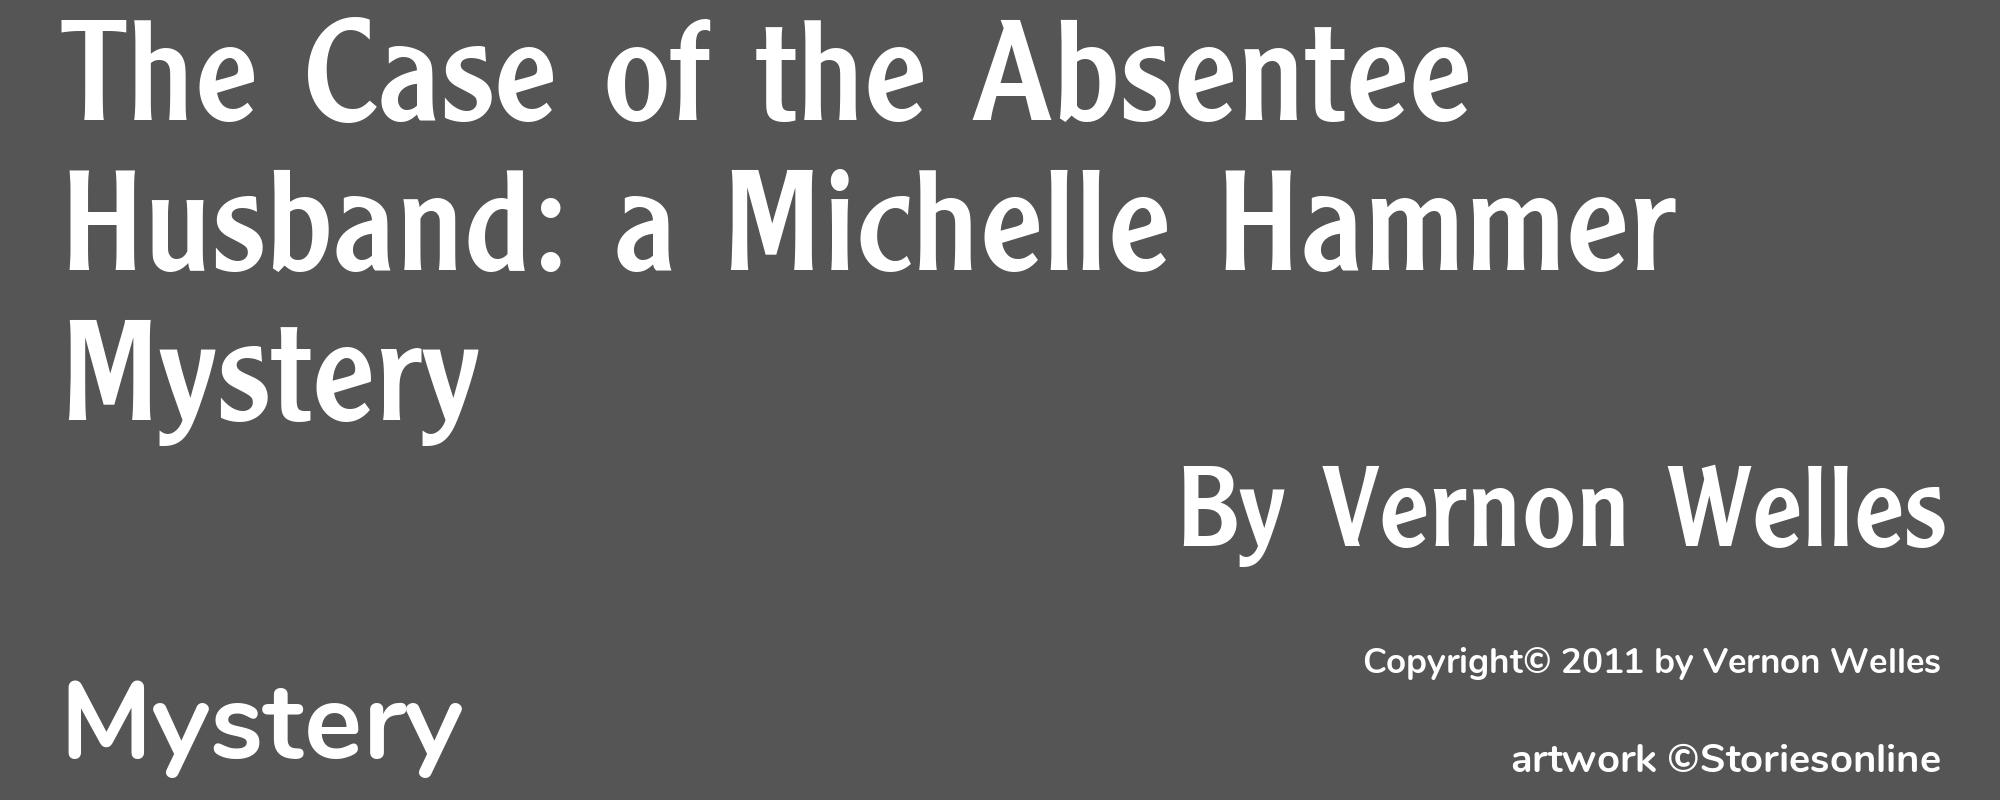 The Case of the Absentee Husband: a Michelle Hammer Mystery - Cover